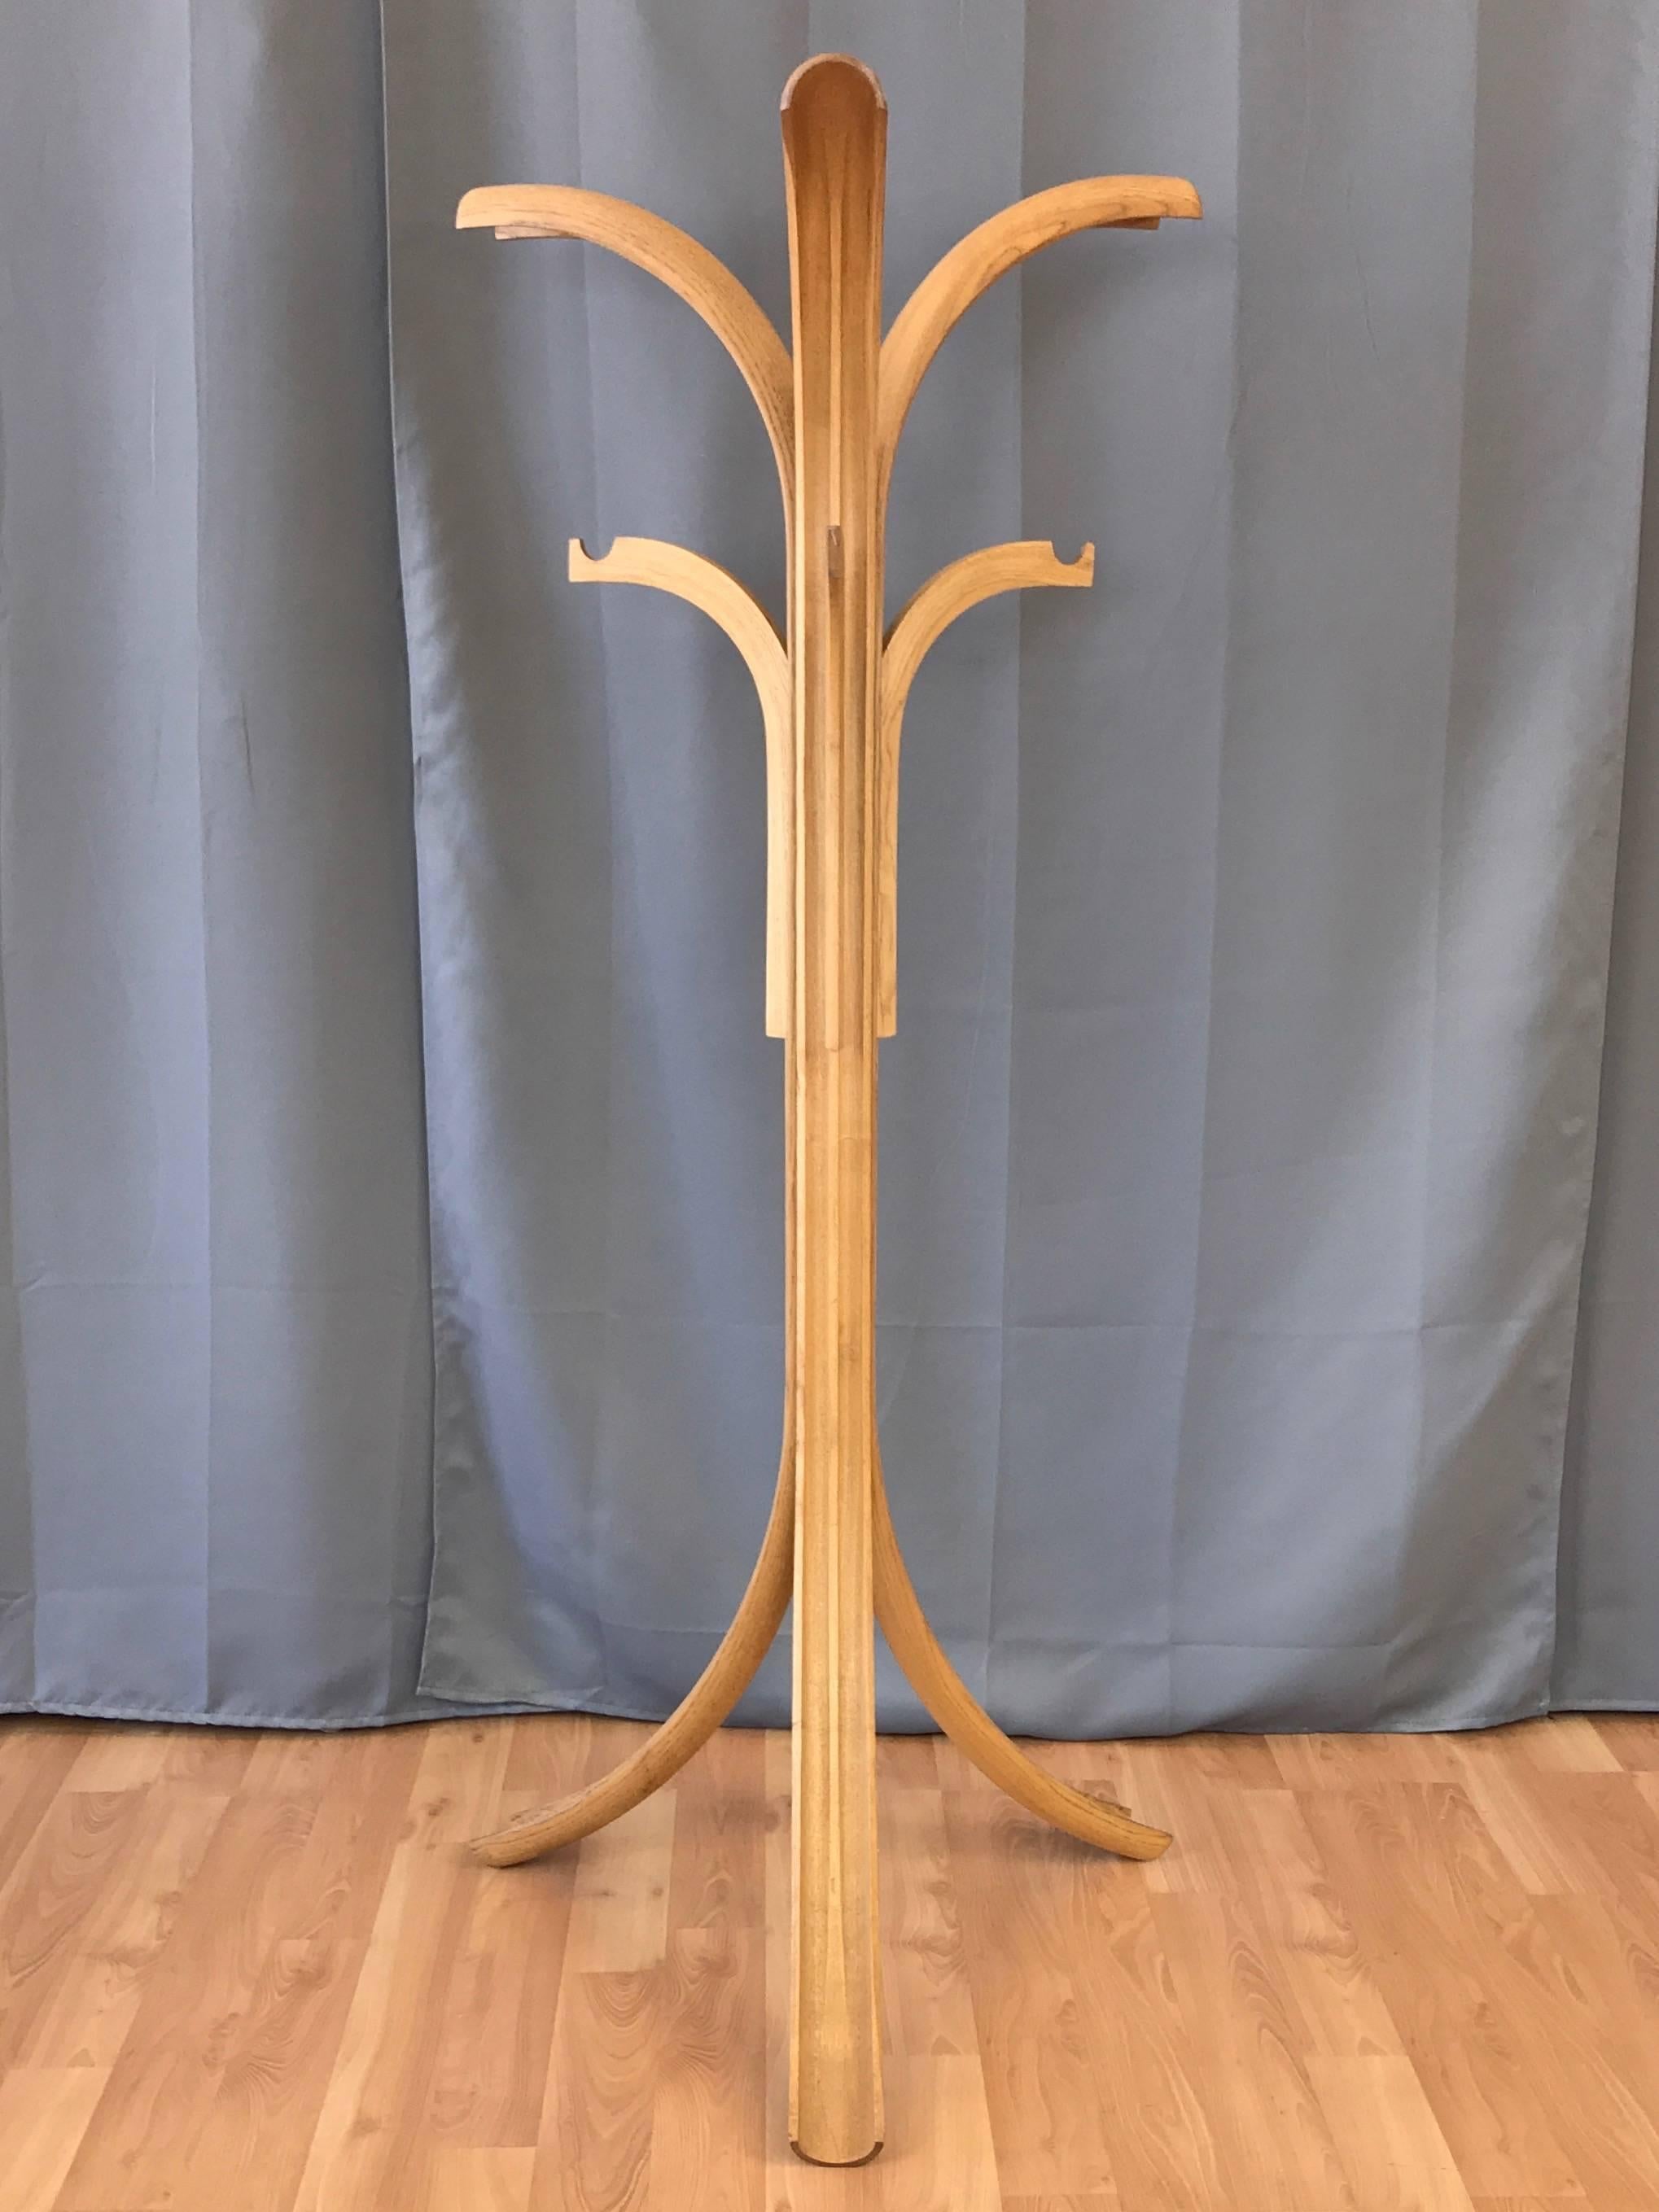 A very uncommon and extremely well executed sculptural coat and hat rack in white oak.

A trio of organic looking and expertly carved, shaped, and bent solid oak beams emulate gracefully curved palm frond stems. Three smaller arms with notches